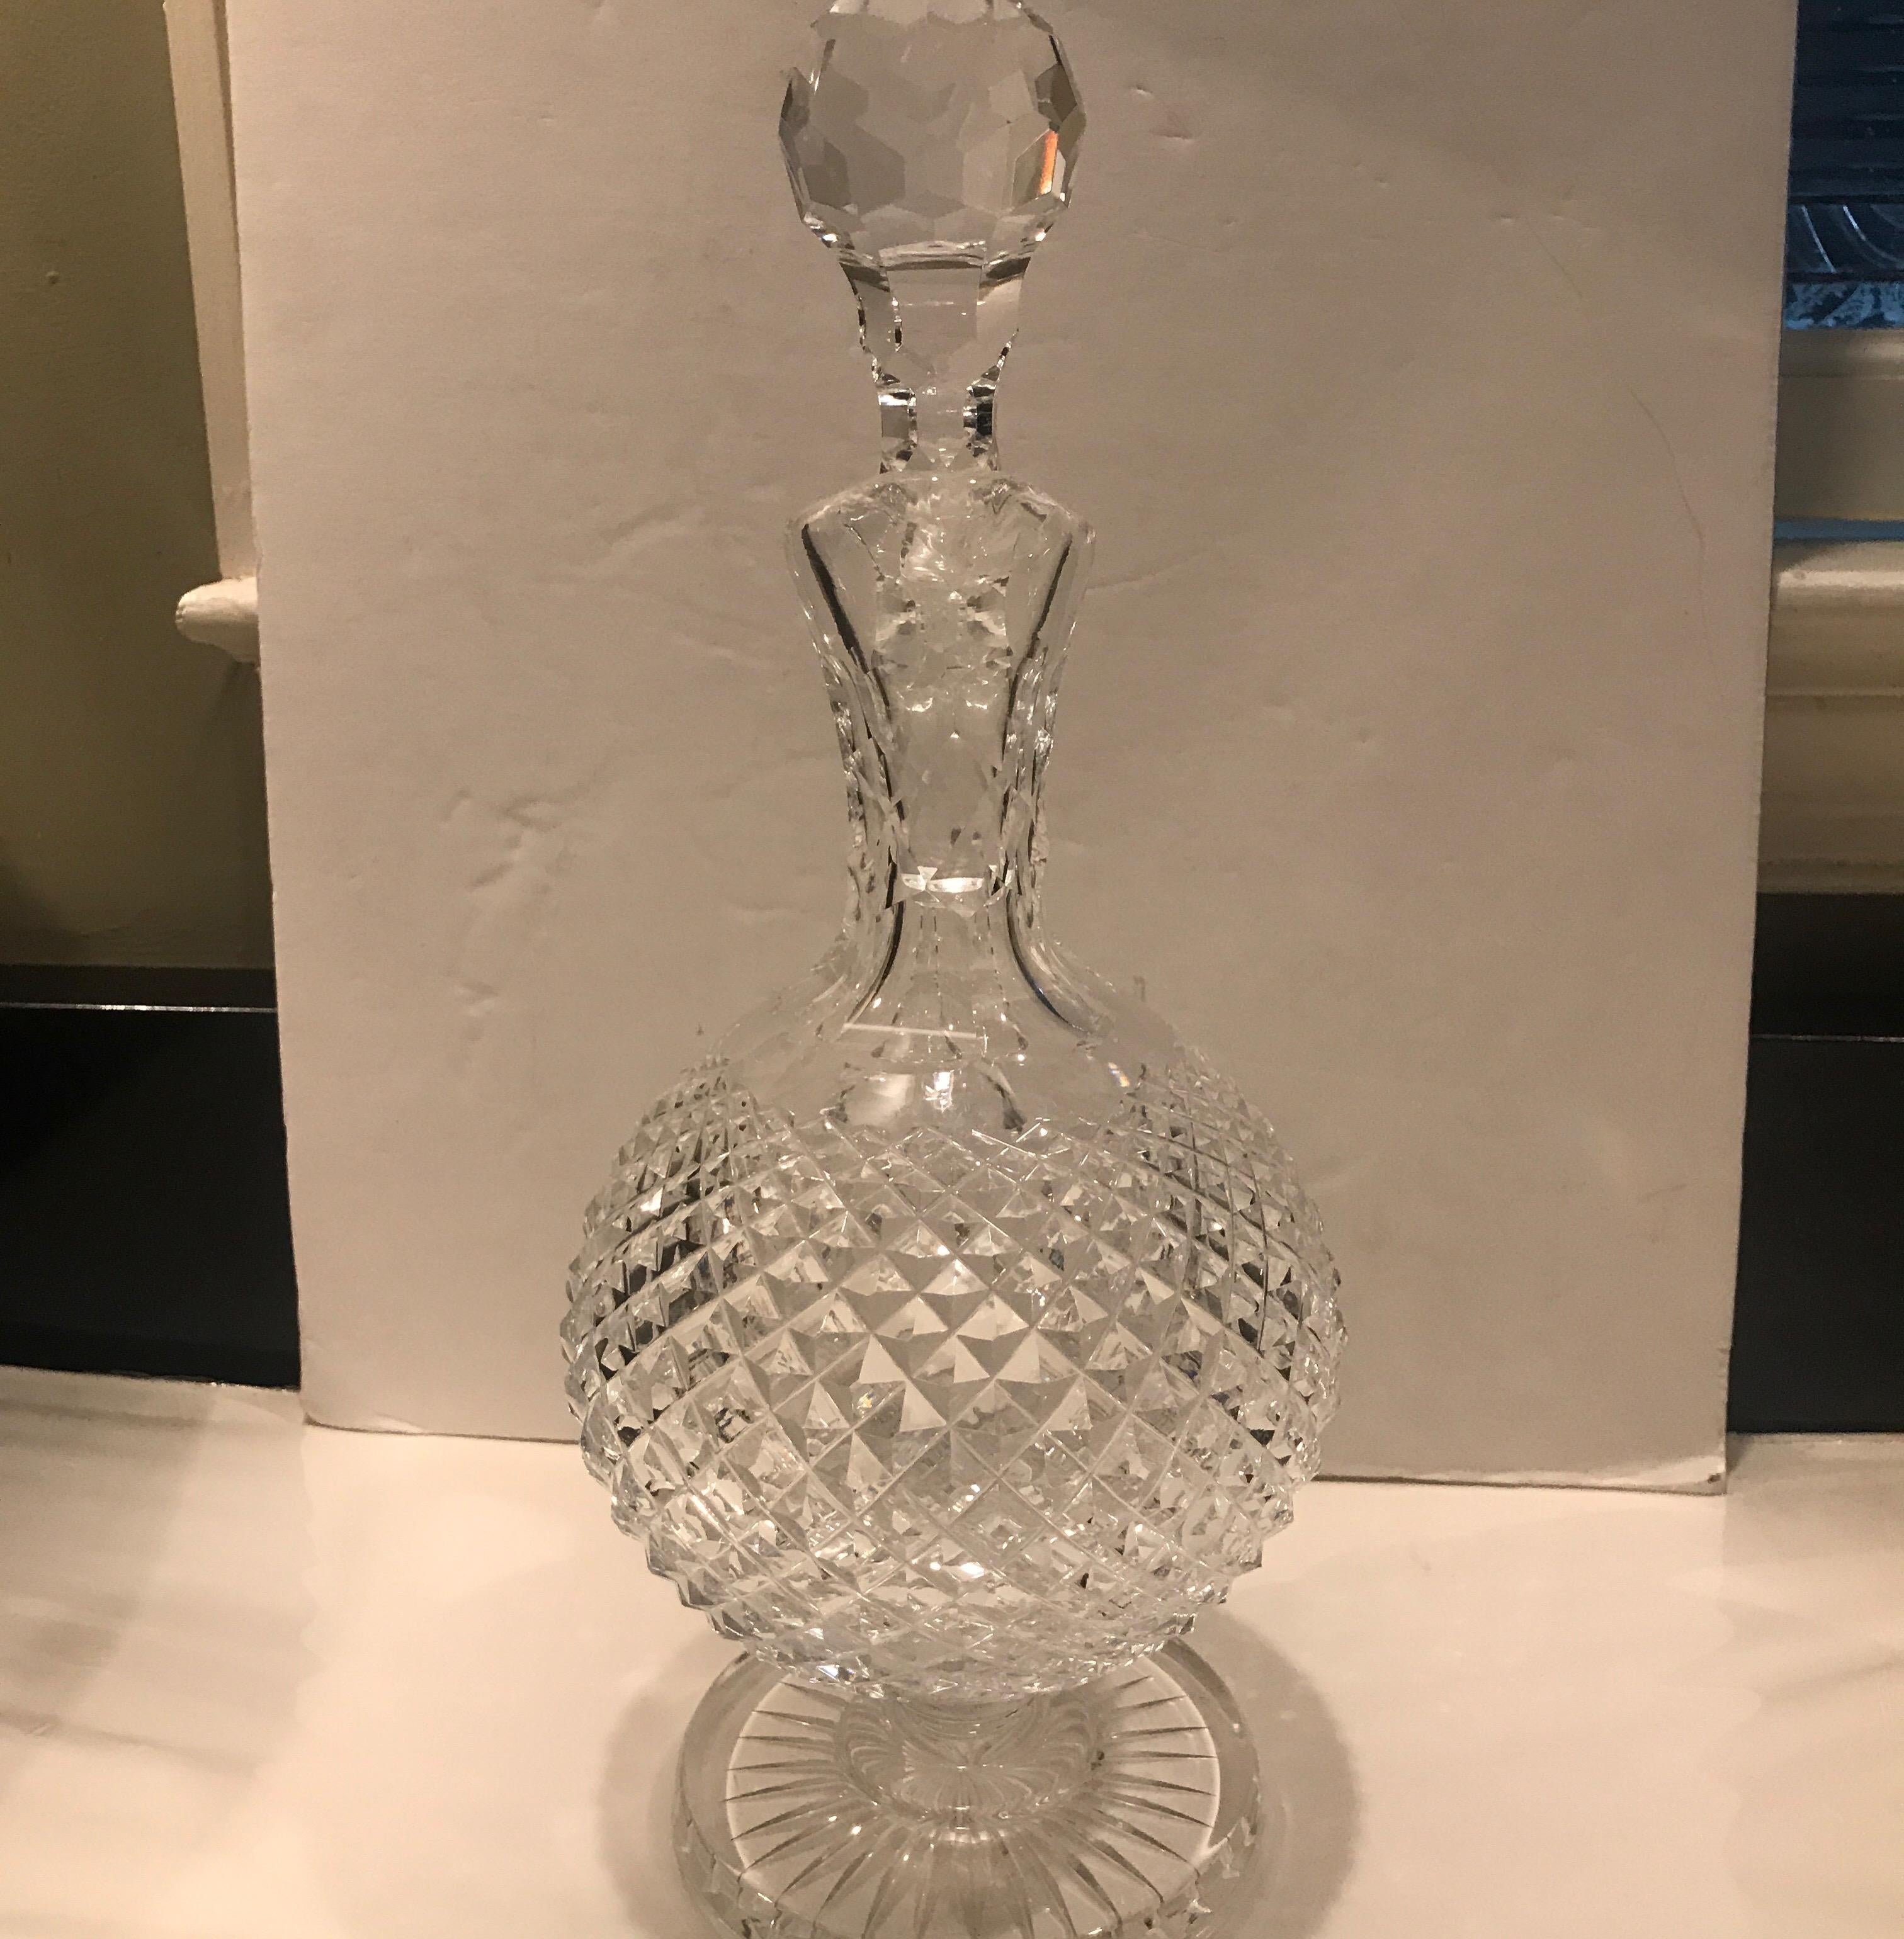 Waterford's Heritage collection illustrates Waterford's commitment to produce iconic pieces that have been beloved for generations, some that date back to the 17th century. Pieces like this Claret Decanter are crafted by a master-cutter, the